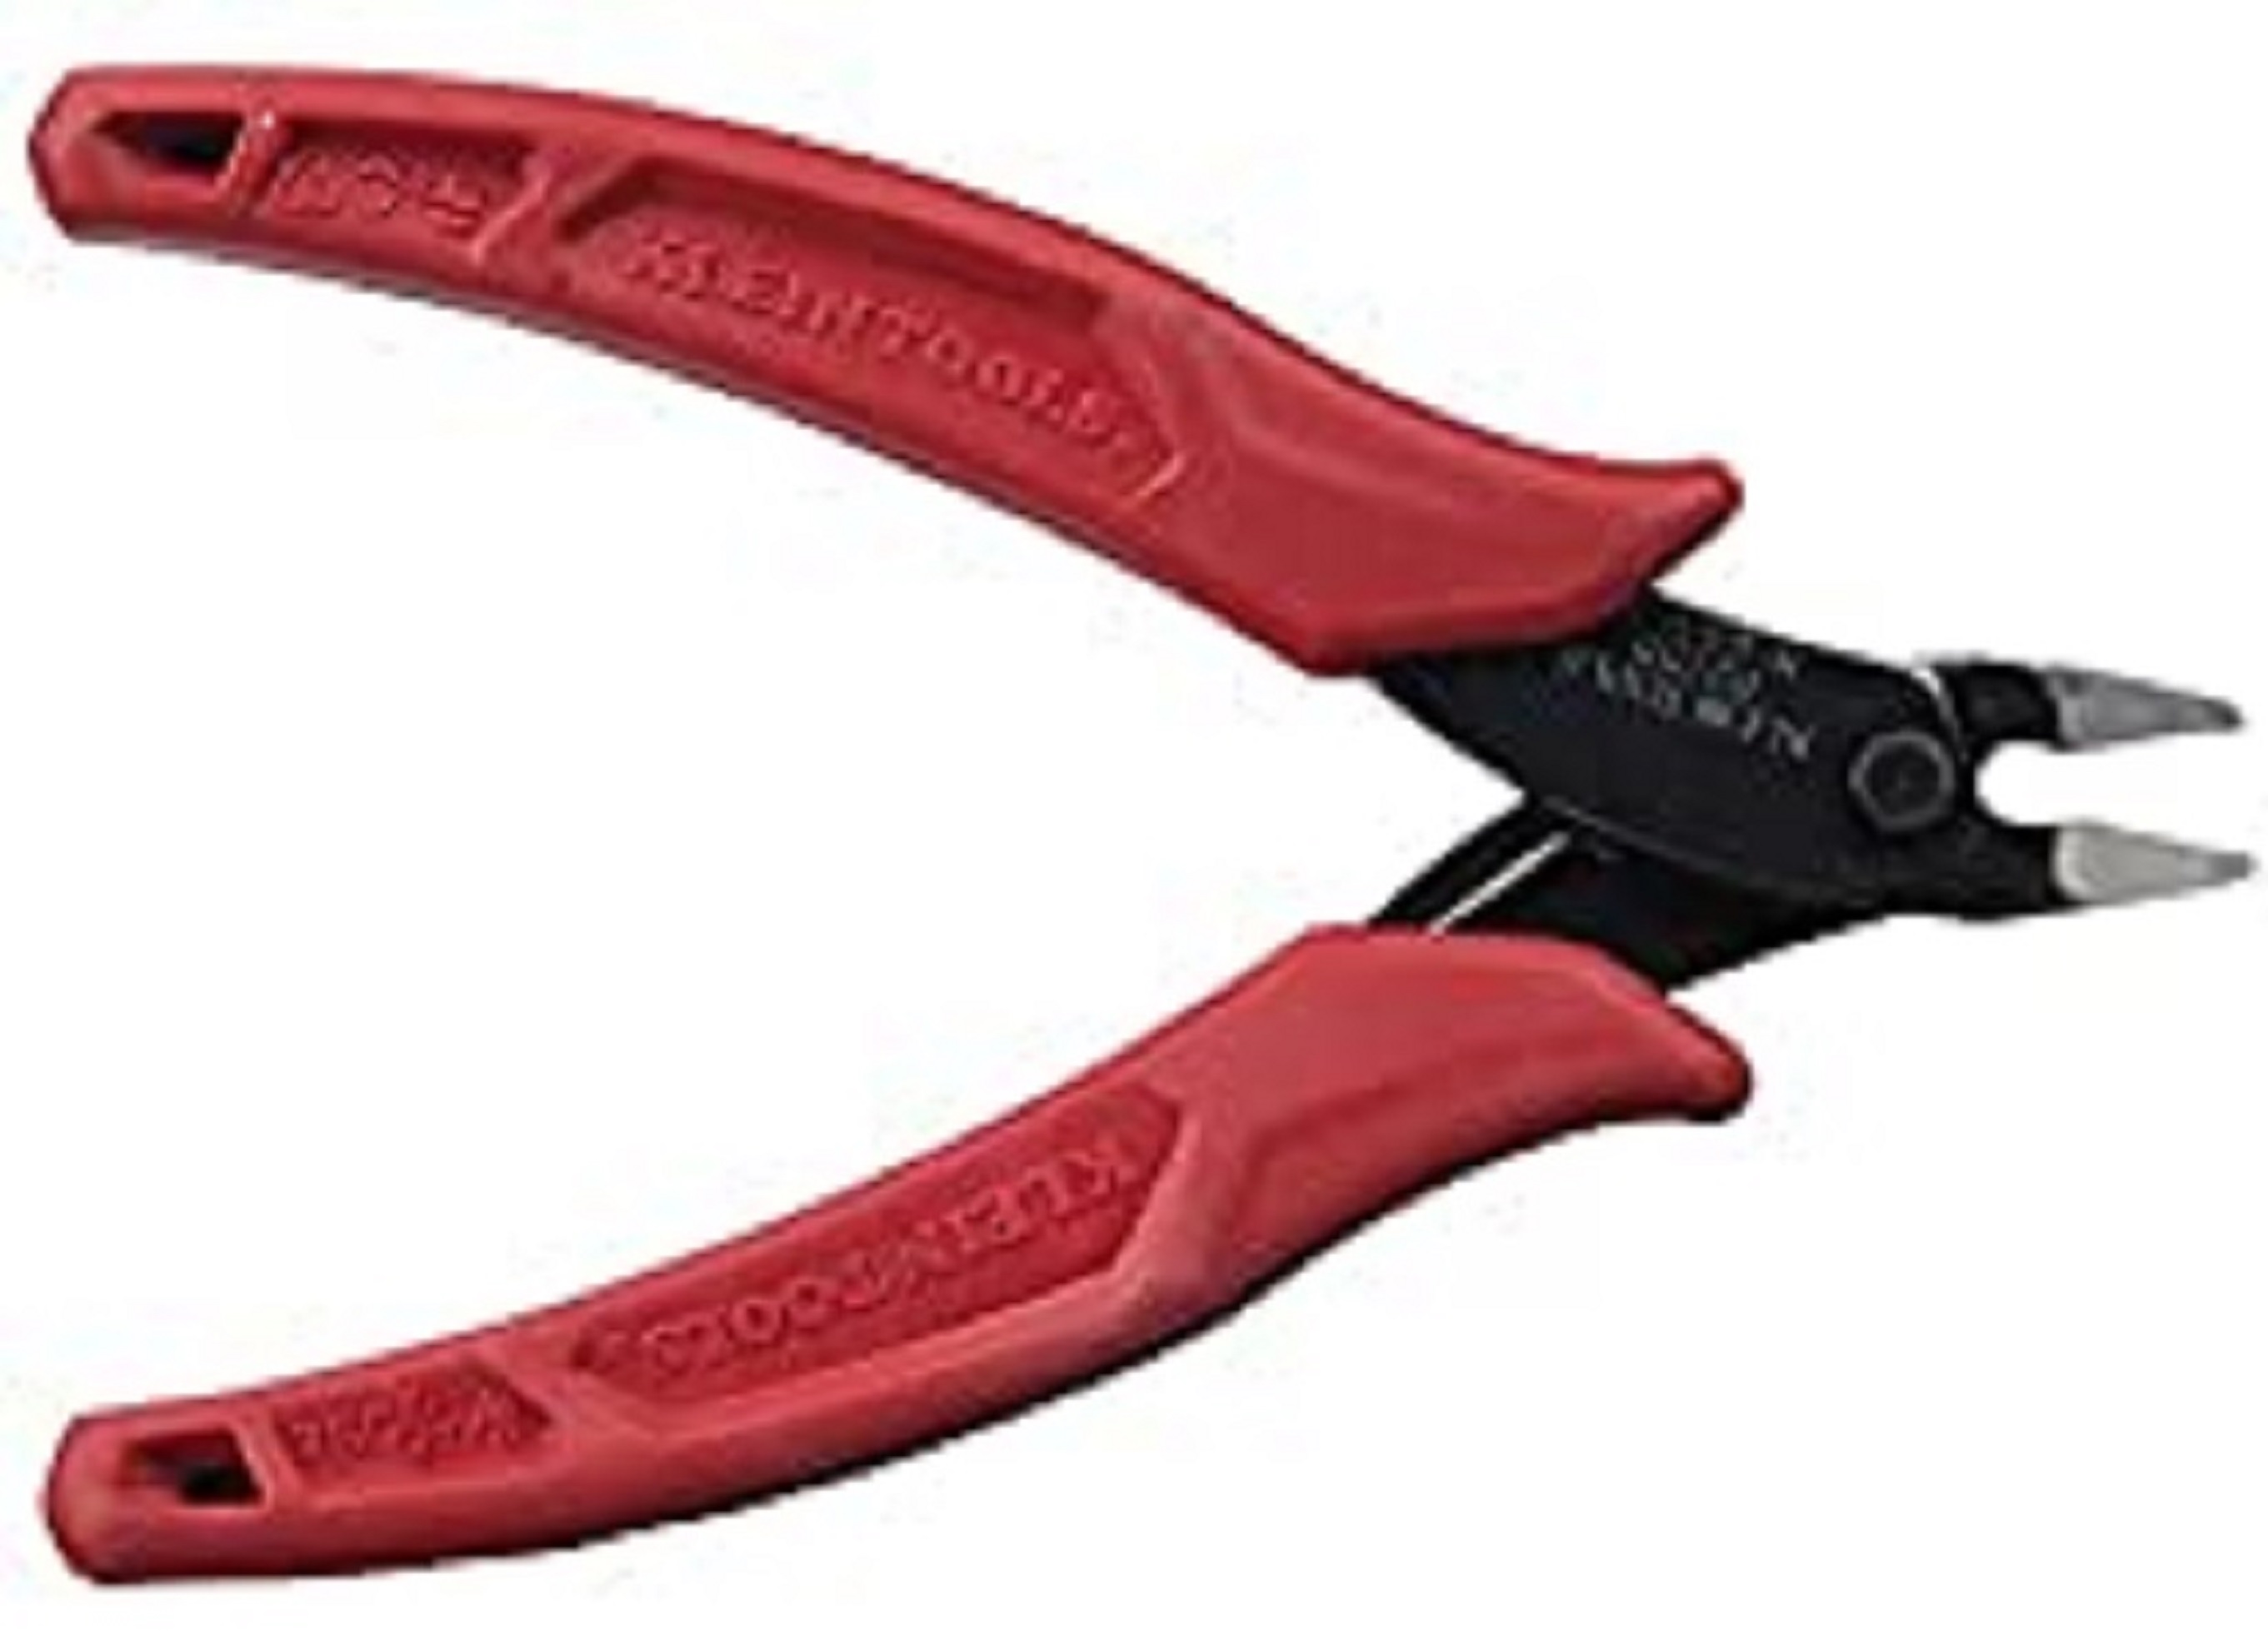 Klein Tools D275-5 Pliers, Diagonal Cutting Pliers with Precision